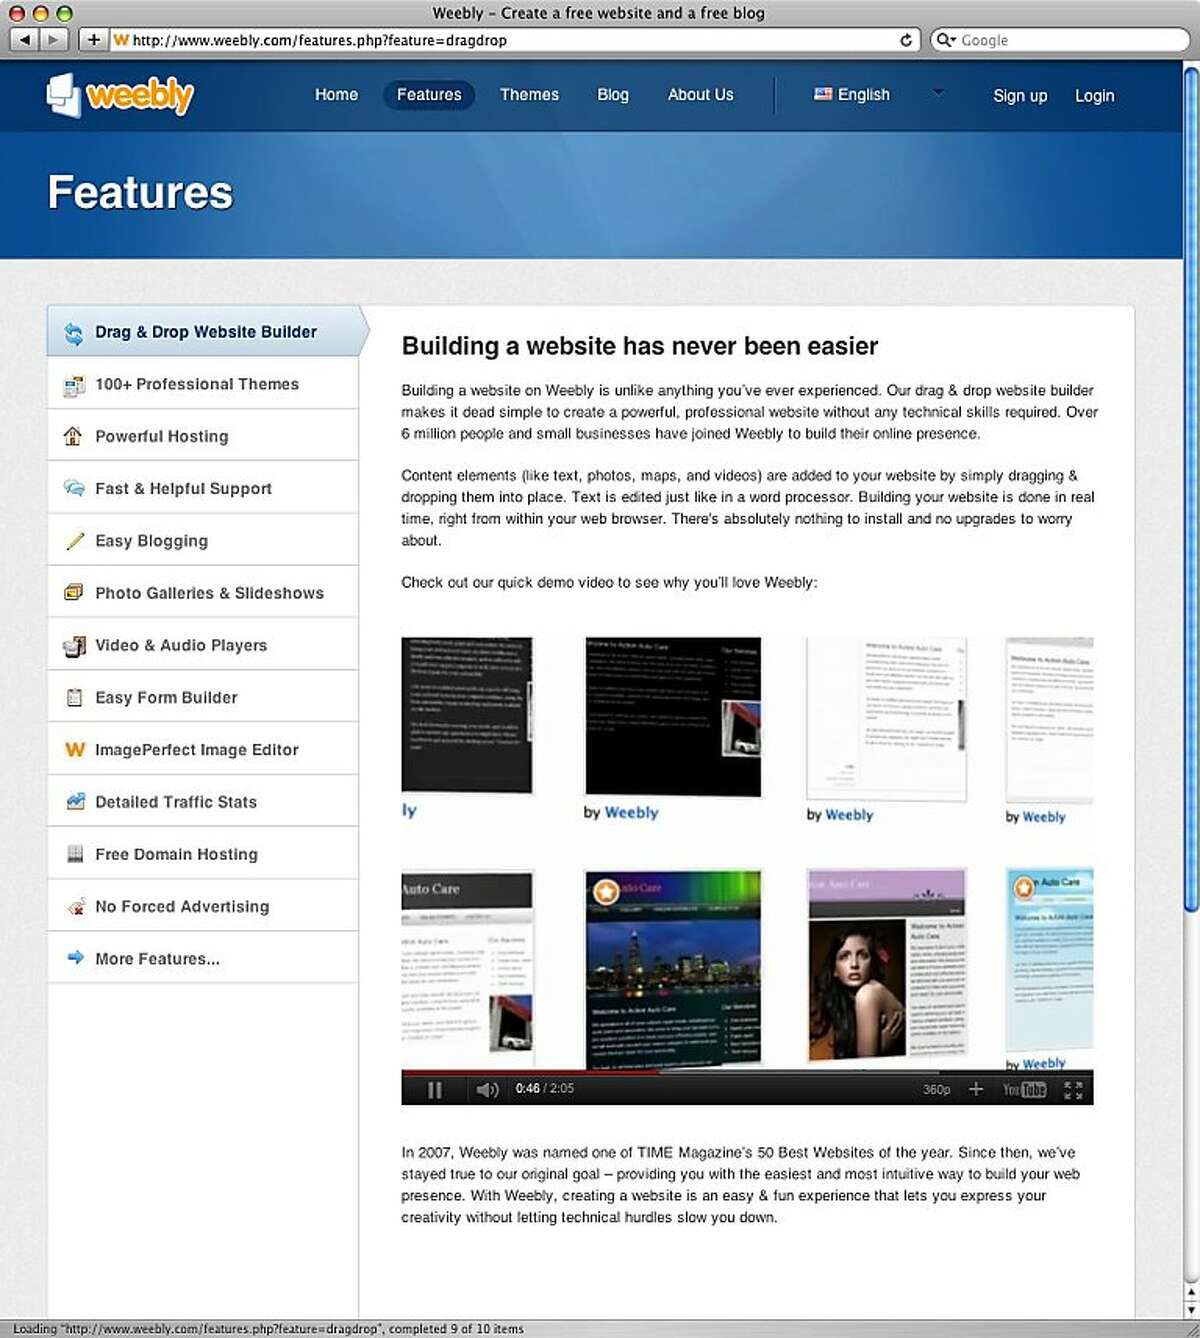 A screen shot of Weebly.com.